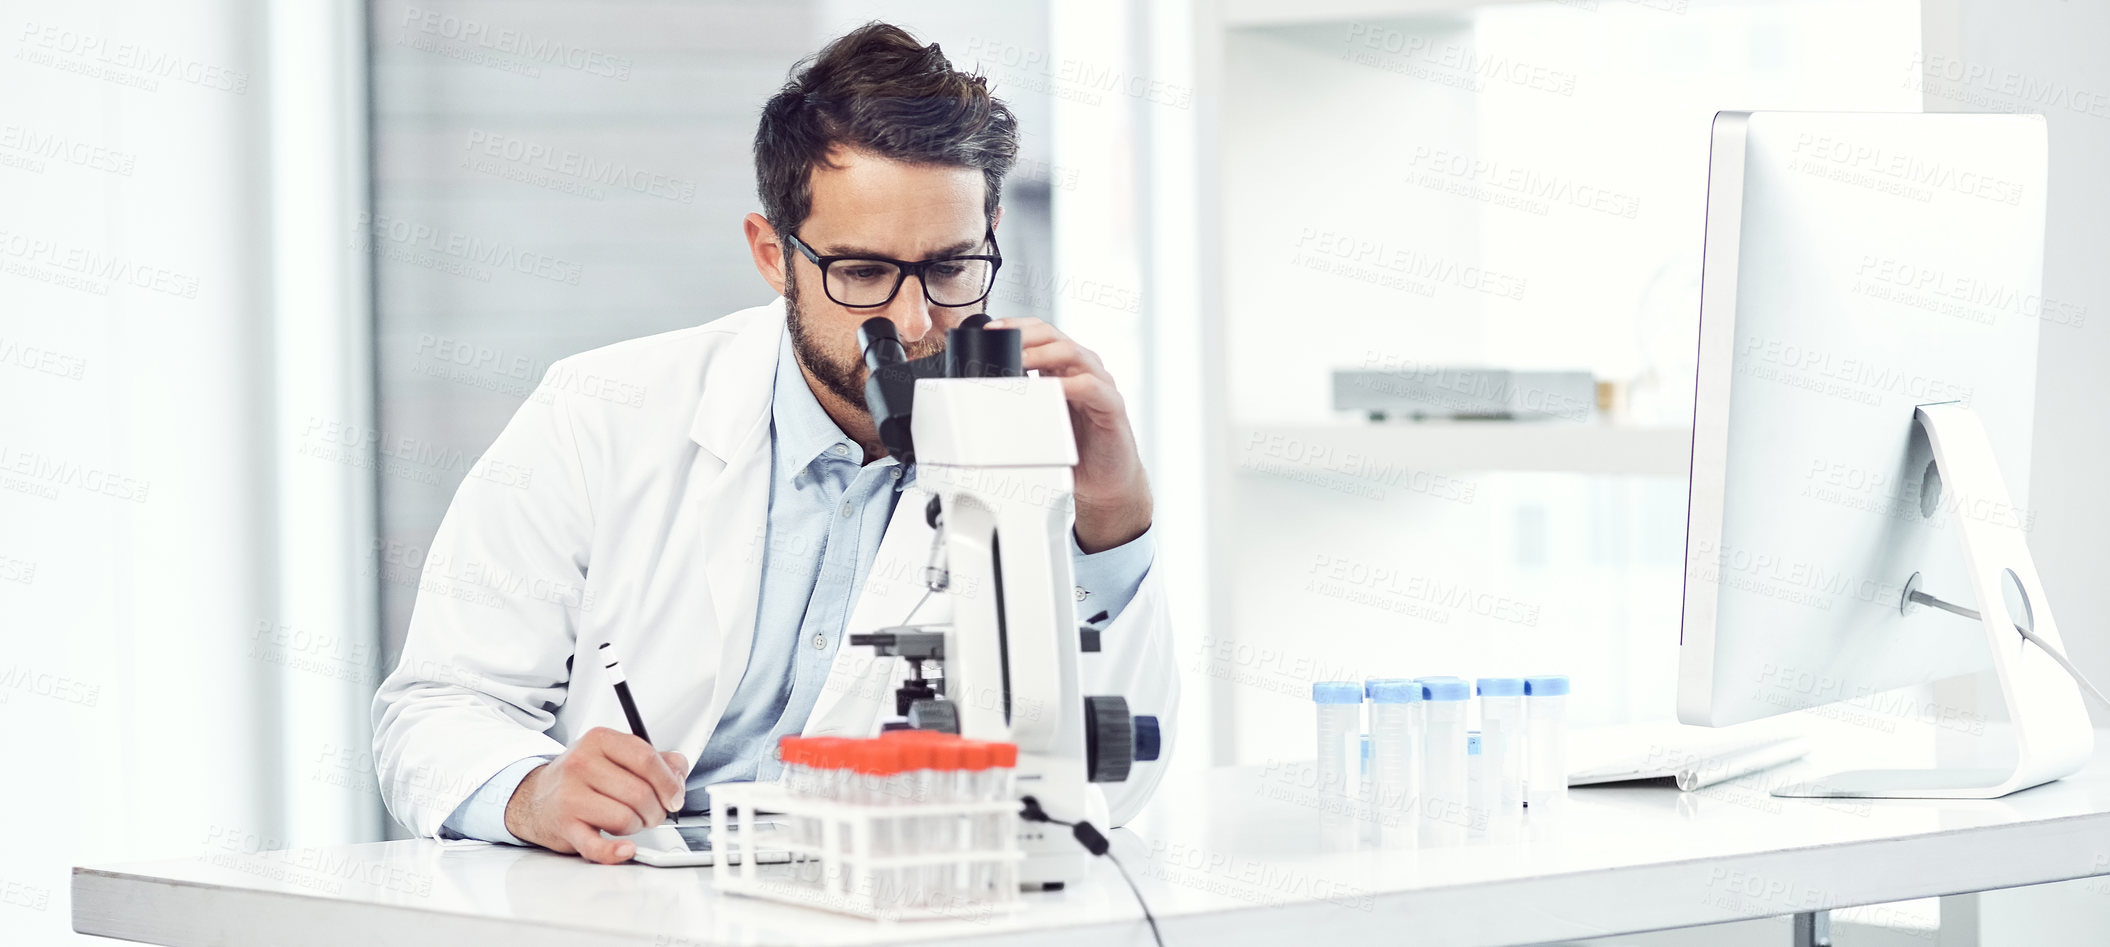 Buy stock photo Shot of a focused young male scientist making notes while looking trough a microscope and being seated inside a laboratory